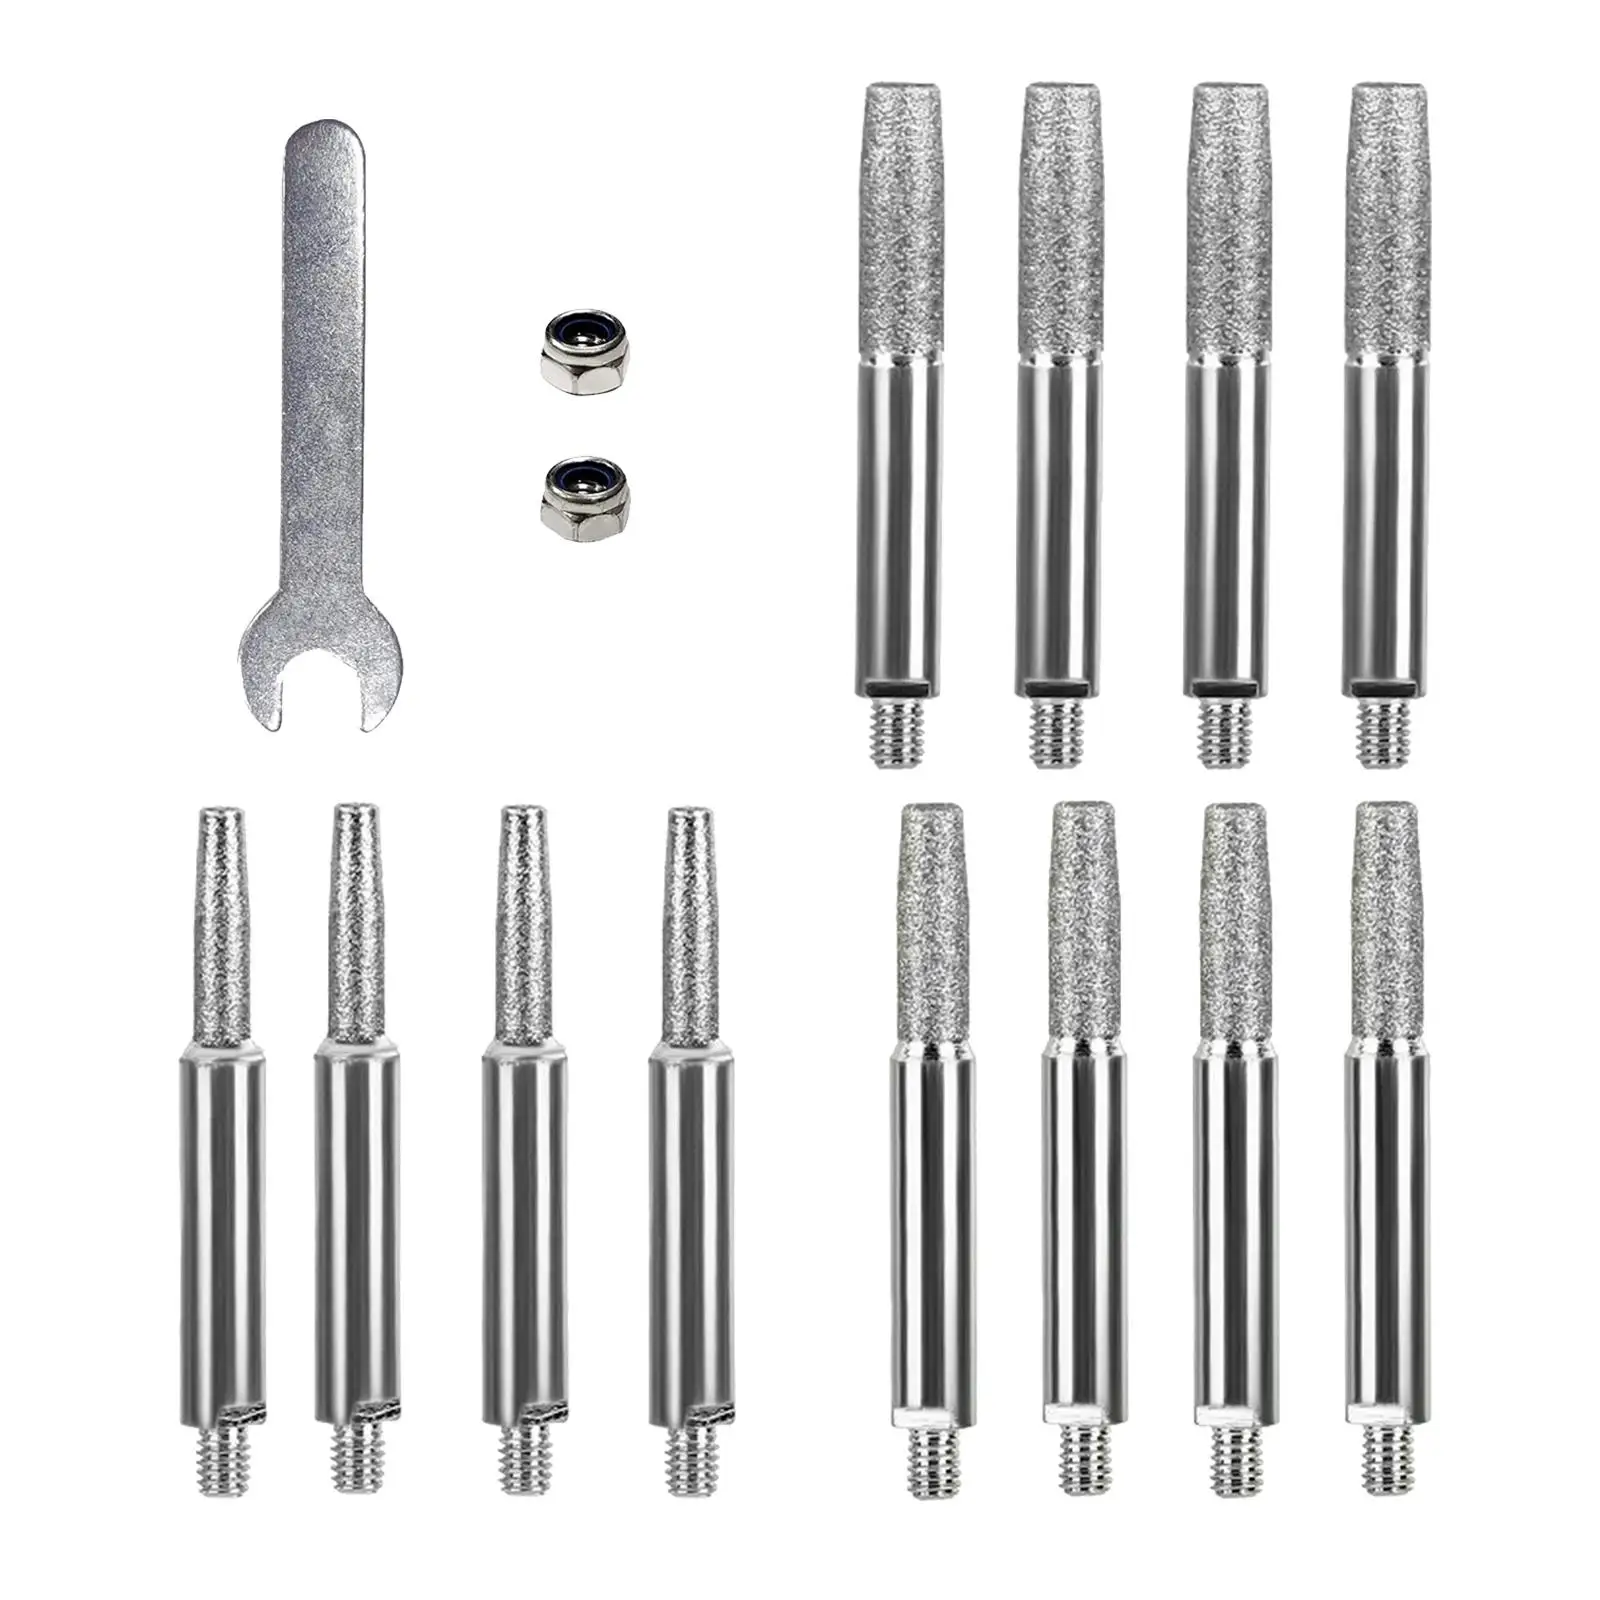 Steel Burr Bit Set Engraving Bit 6mm Shank for Jewelry stone and Wood Working Electric Saw Engraving Polishing